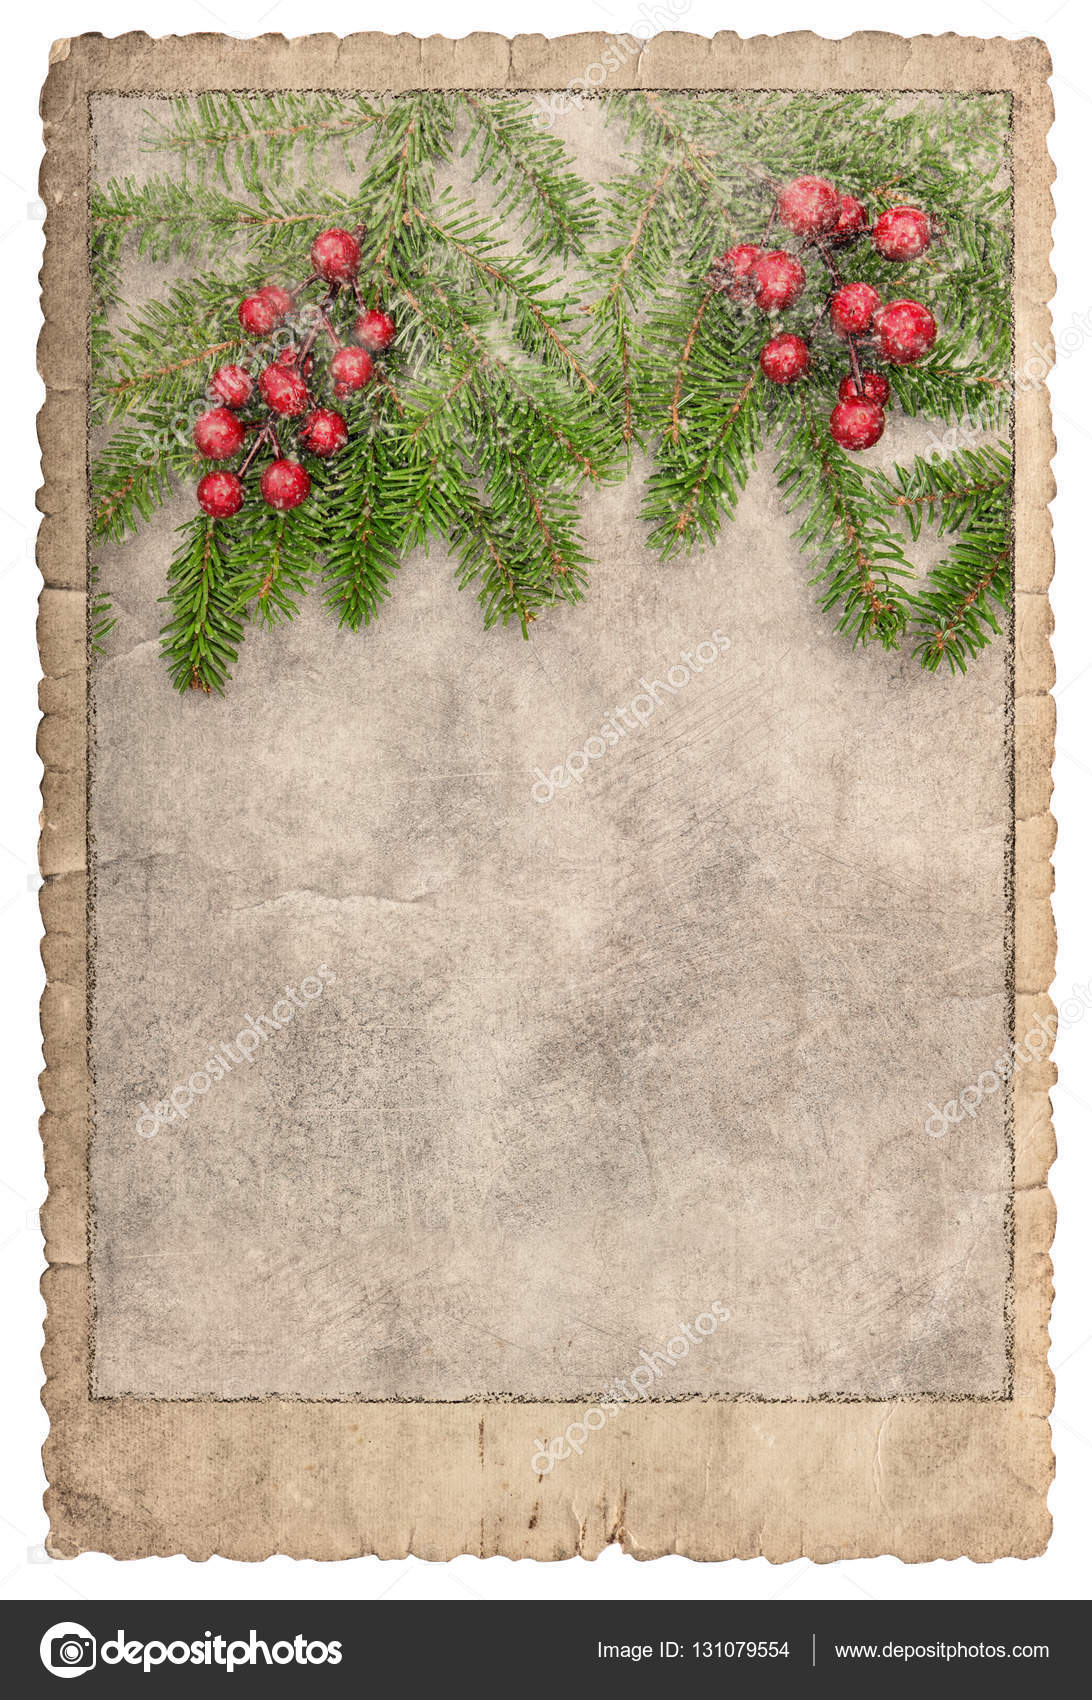 Vintage style christmas card Frame photos pictures Used paper Stock Photo  by ©LiliGraphie 131079554